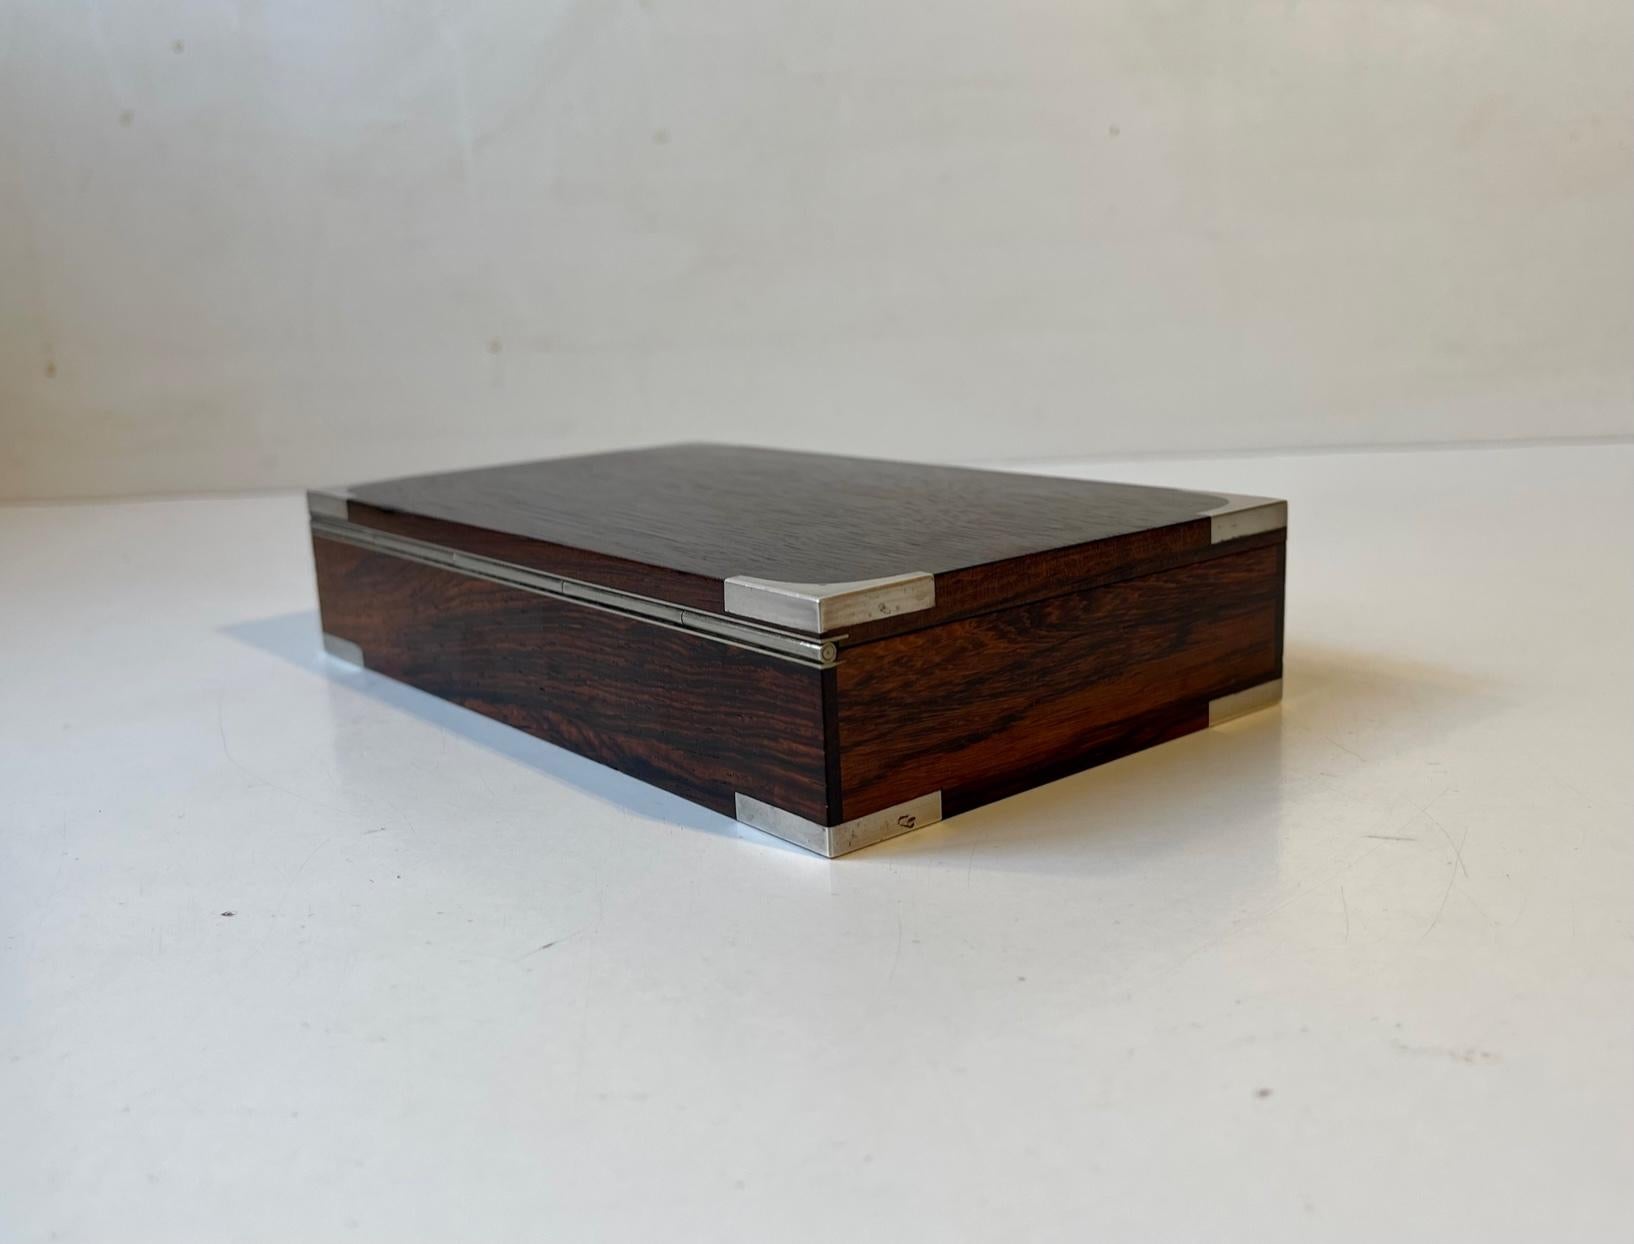 Hans Hansen Danish Modern Cigar Box in Rosewood and Sterling Silver, 1950s For Sale 4